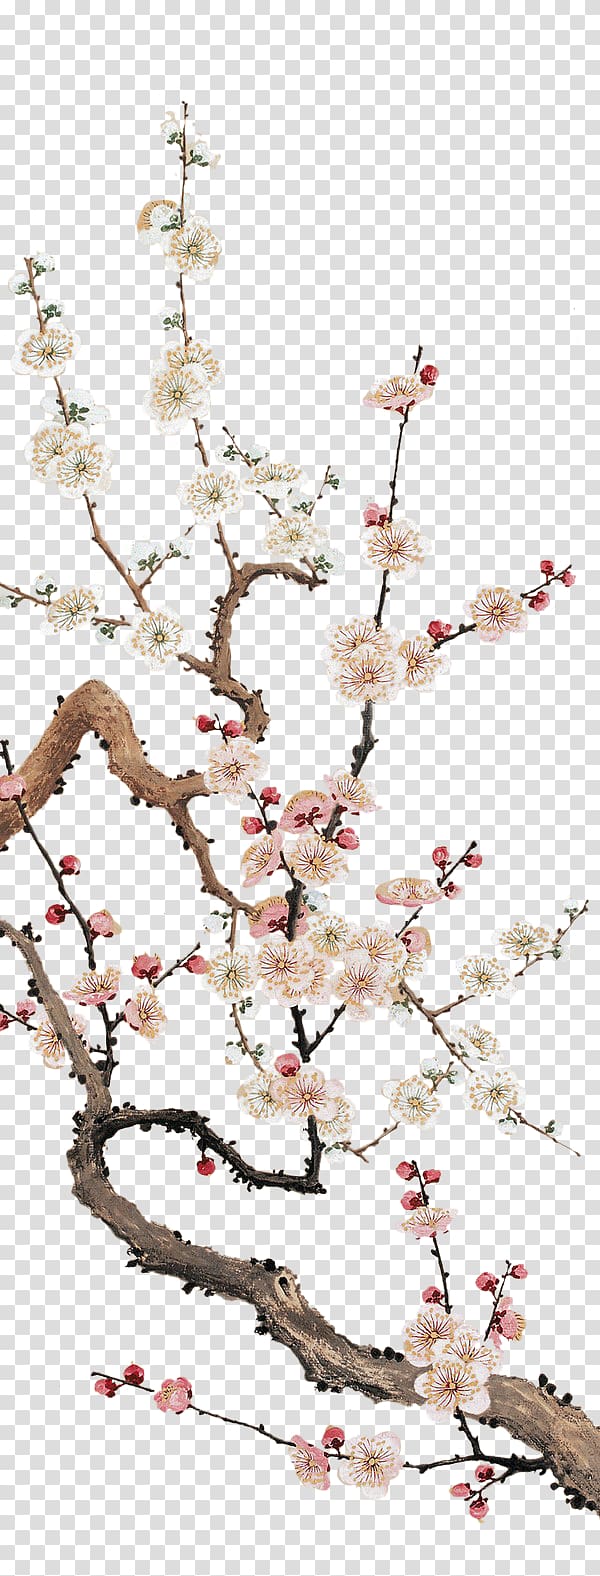 pink and white flowers illustration, Cherry blossom Plum blossom Flower, Plum flower transparent background PNG clipart